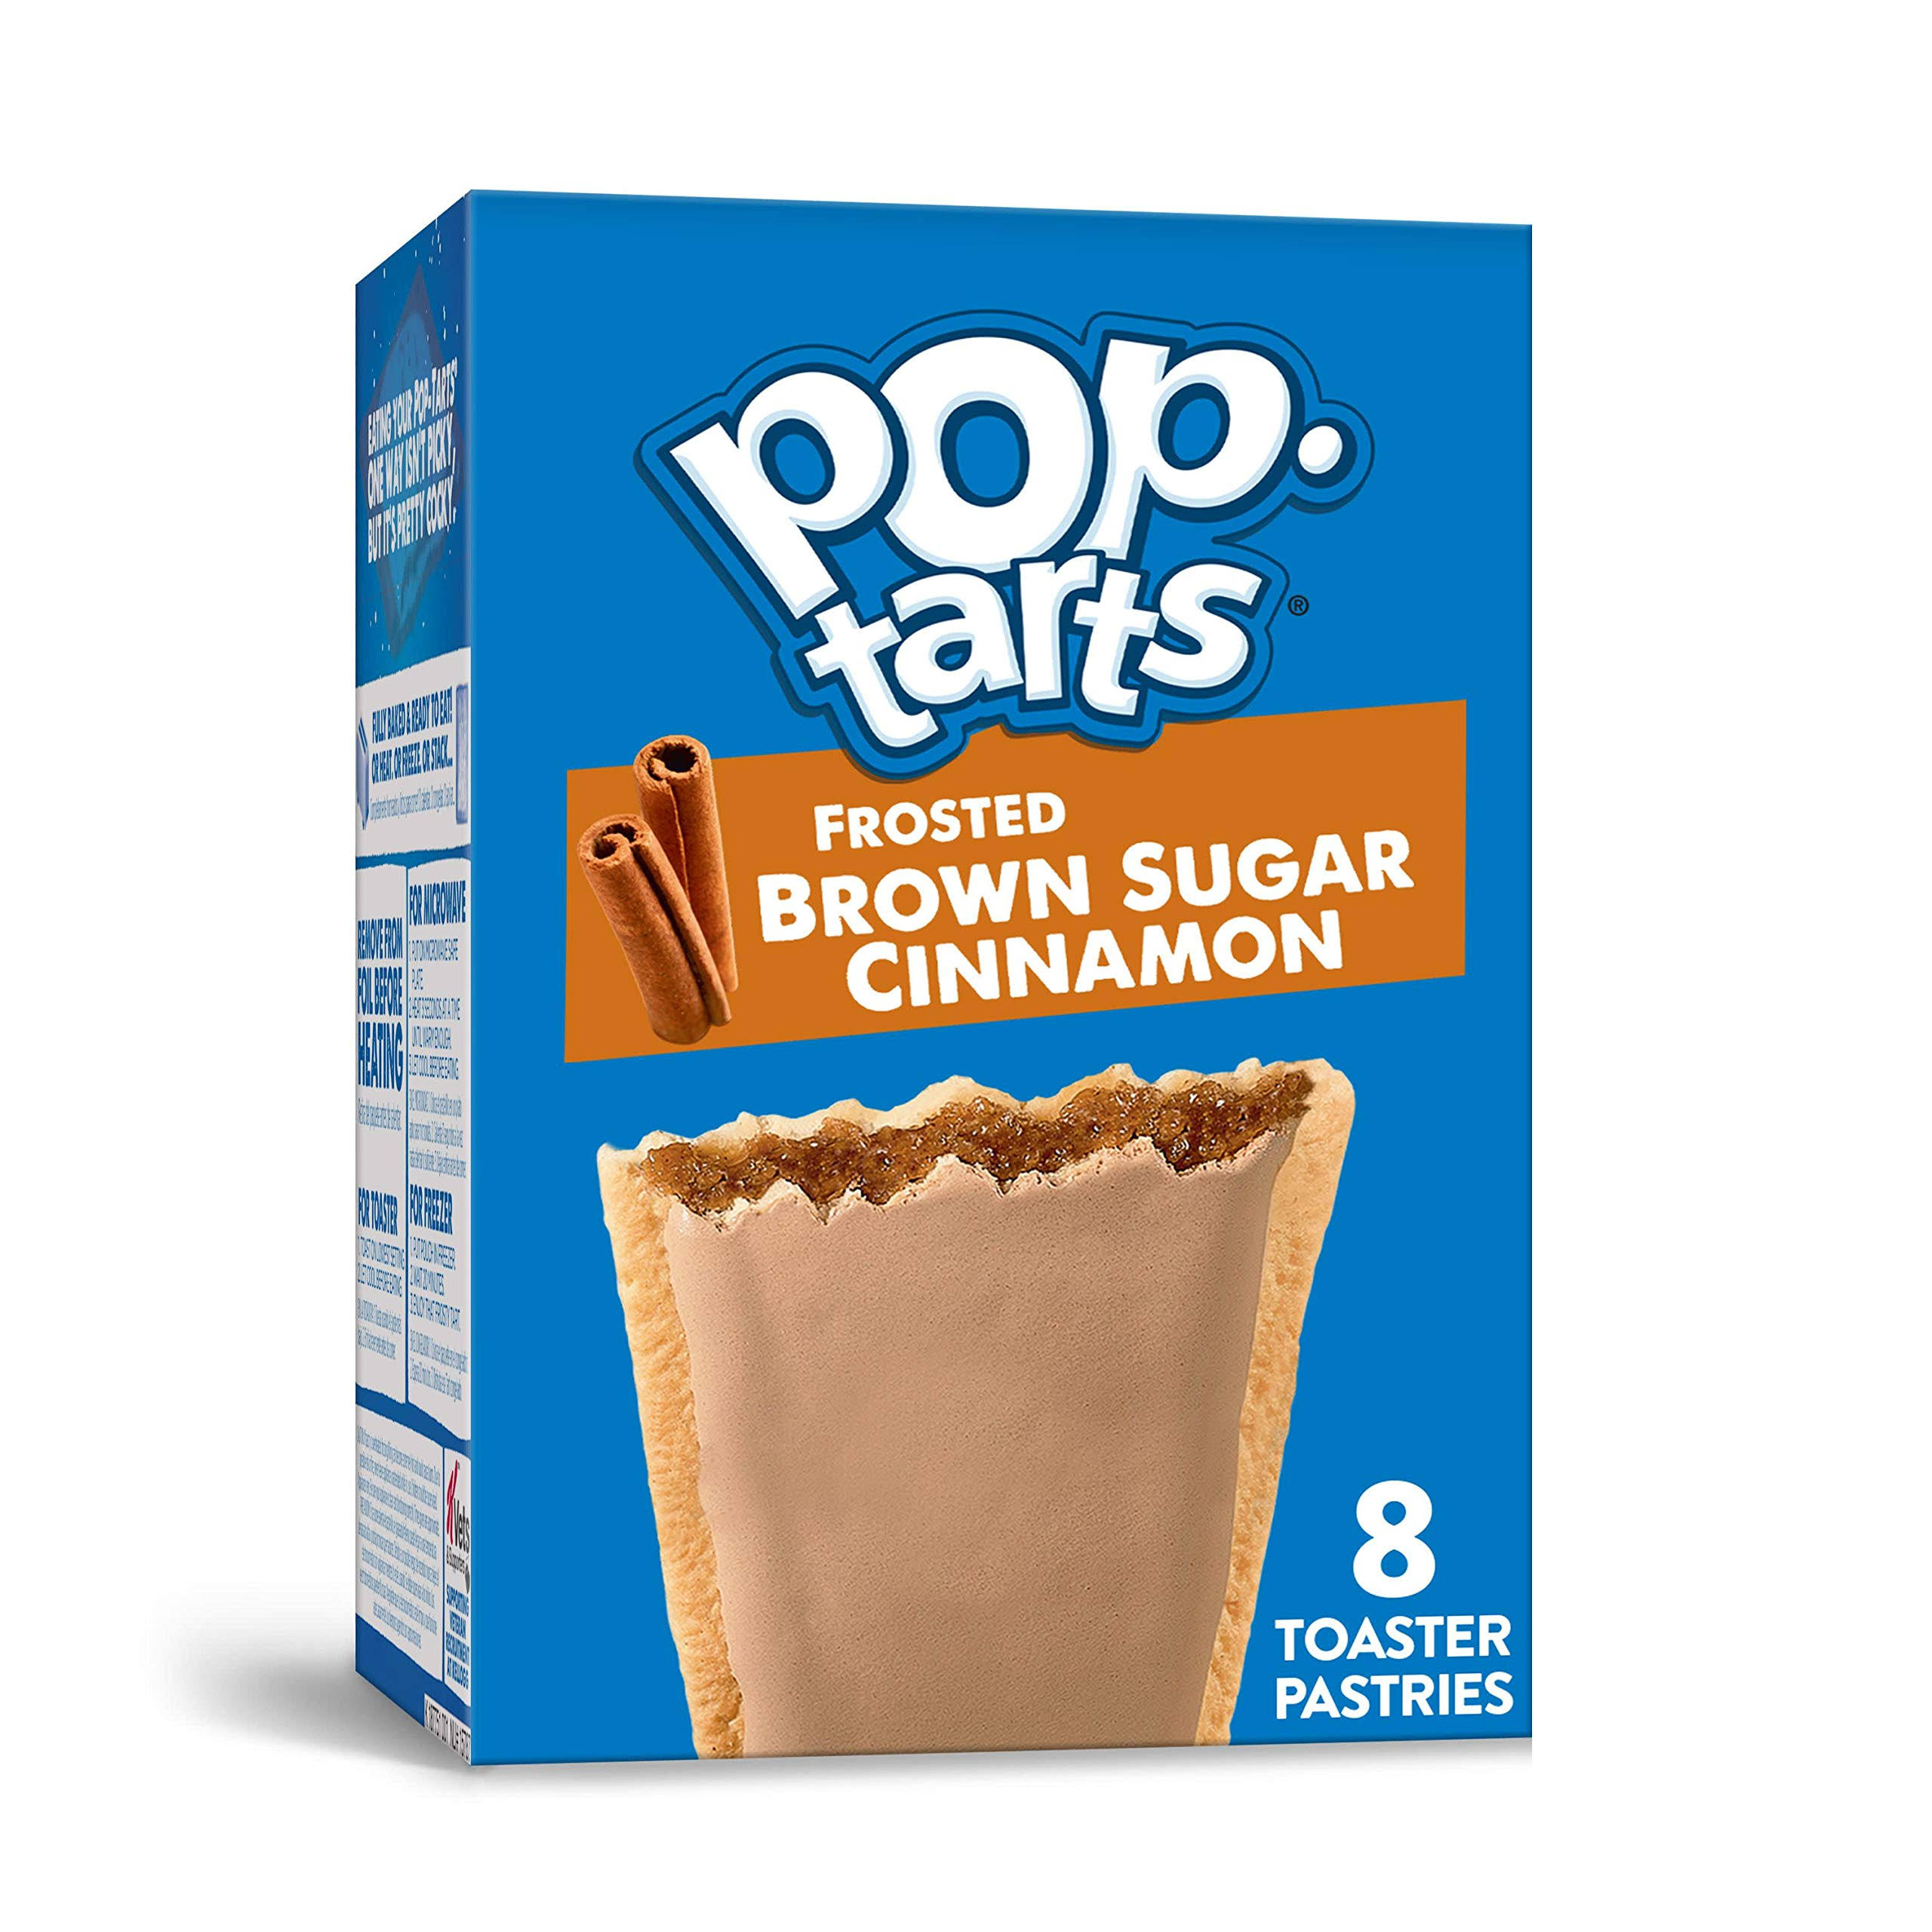 Pop-Tarts Toaster Pastries - Frosted Brown Sugar Cinnamon, 8 Toaster Pastries, 397g